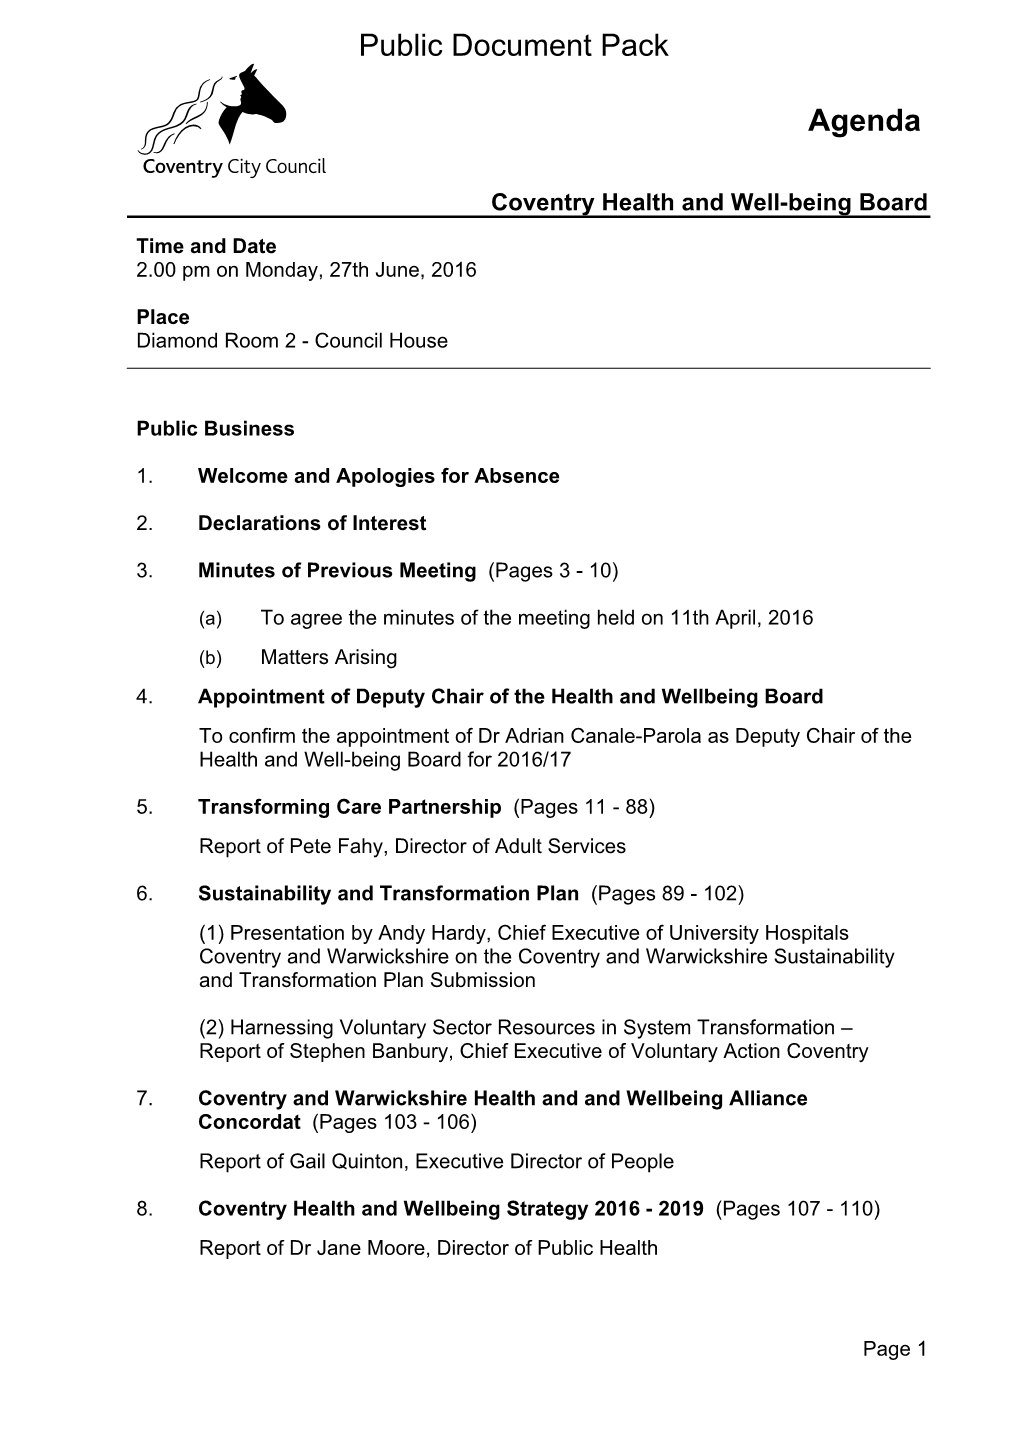 (Public Pack)Agenda Document for Coventry Health and Well-Being